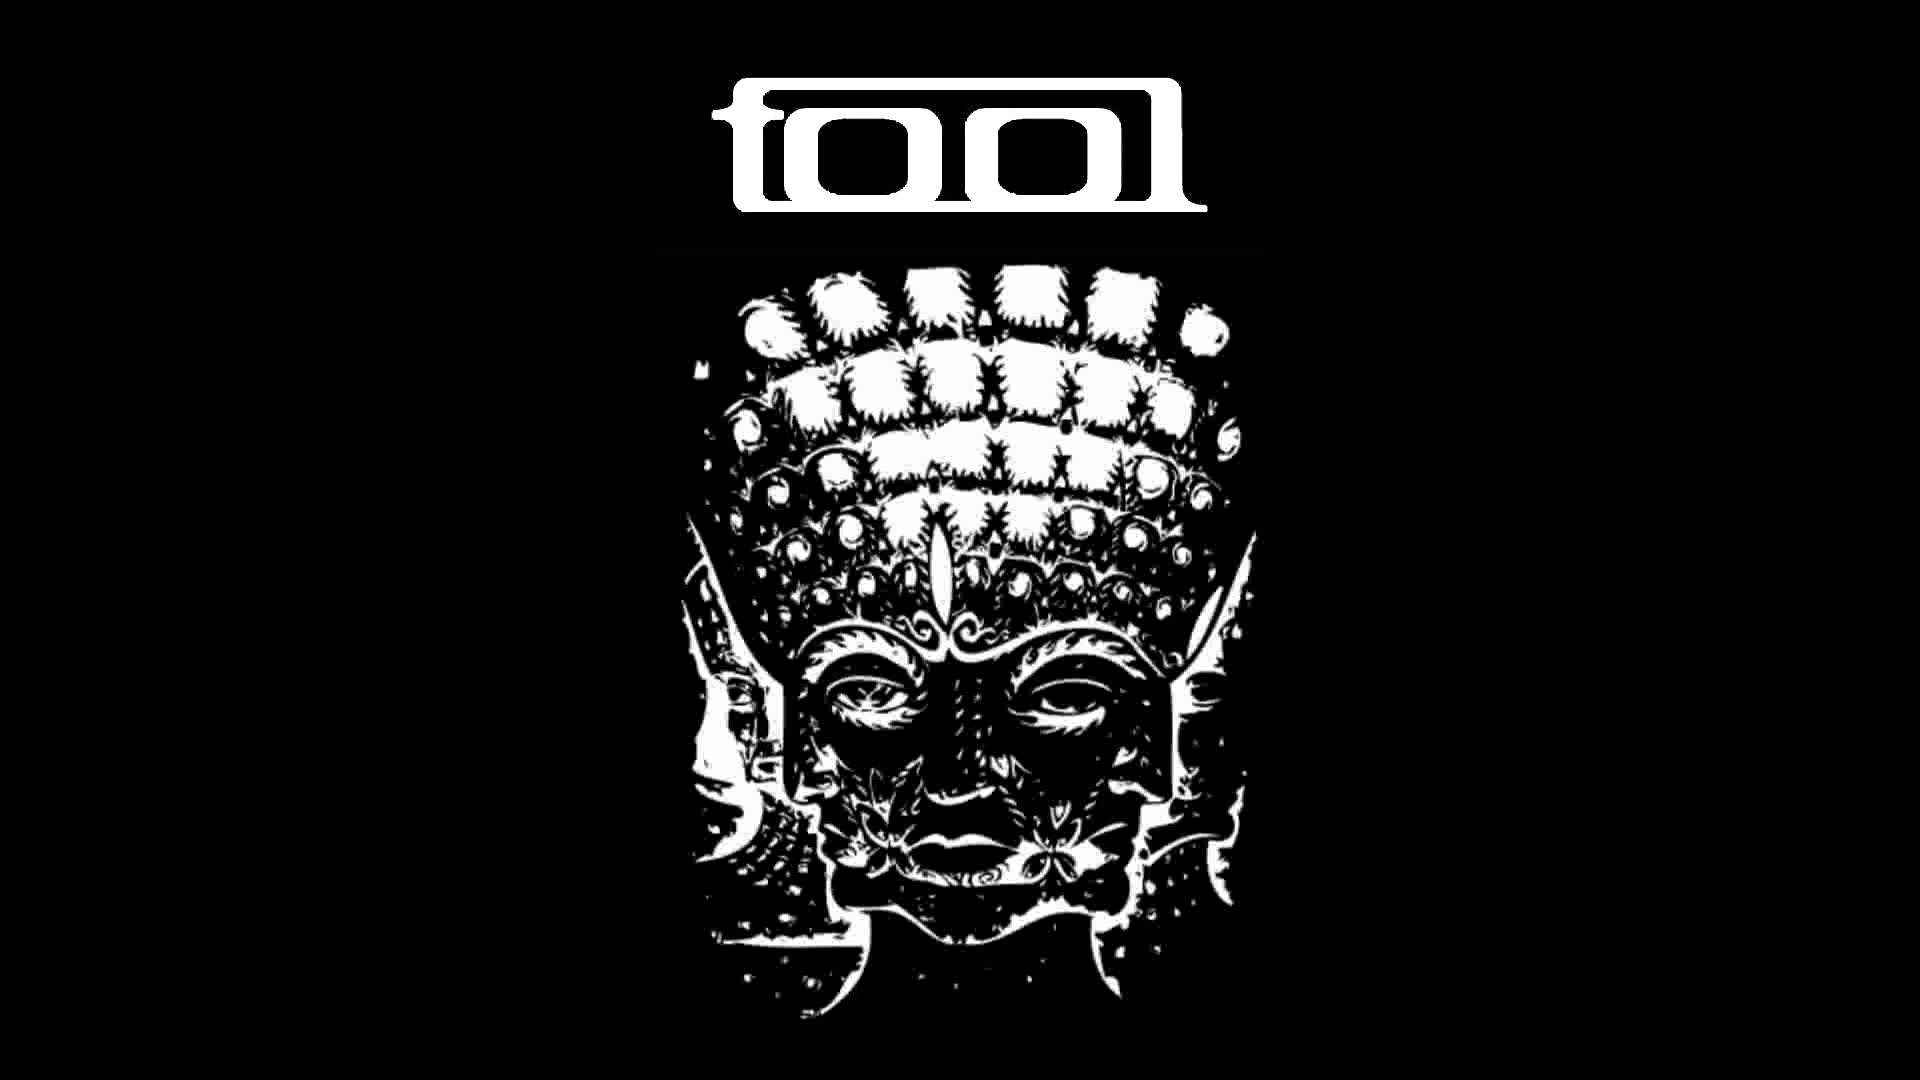 Tool Pictures Tool Hq Wallpapers 
 Data Src Top Rage - Tool 10000 Days Cd Art - HD Wallpaper 